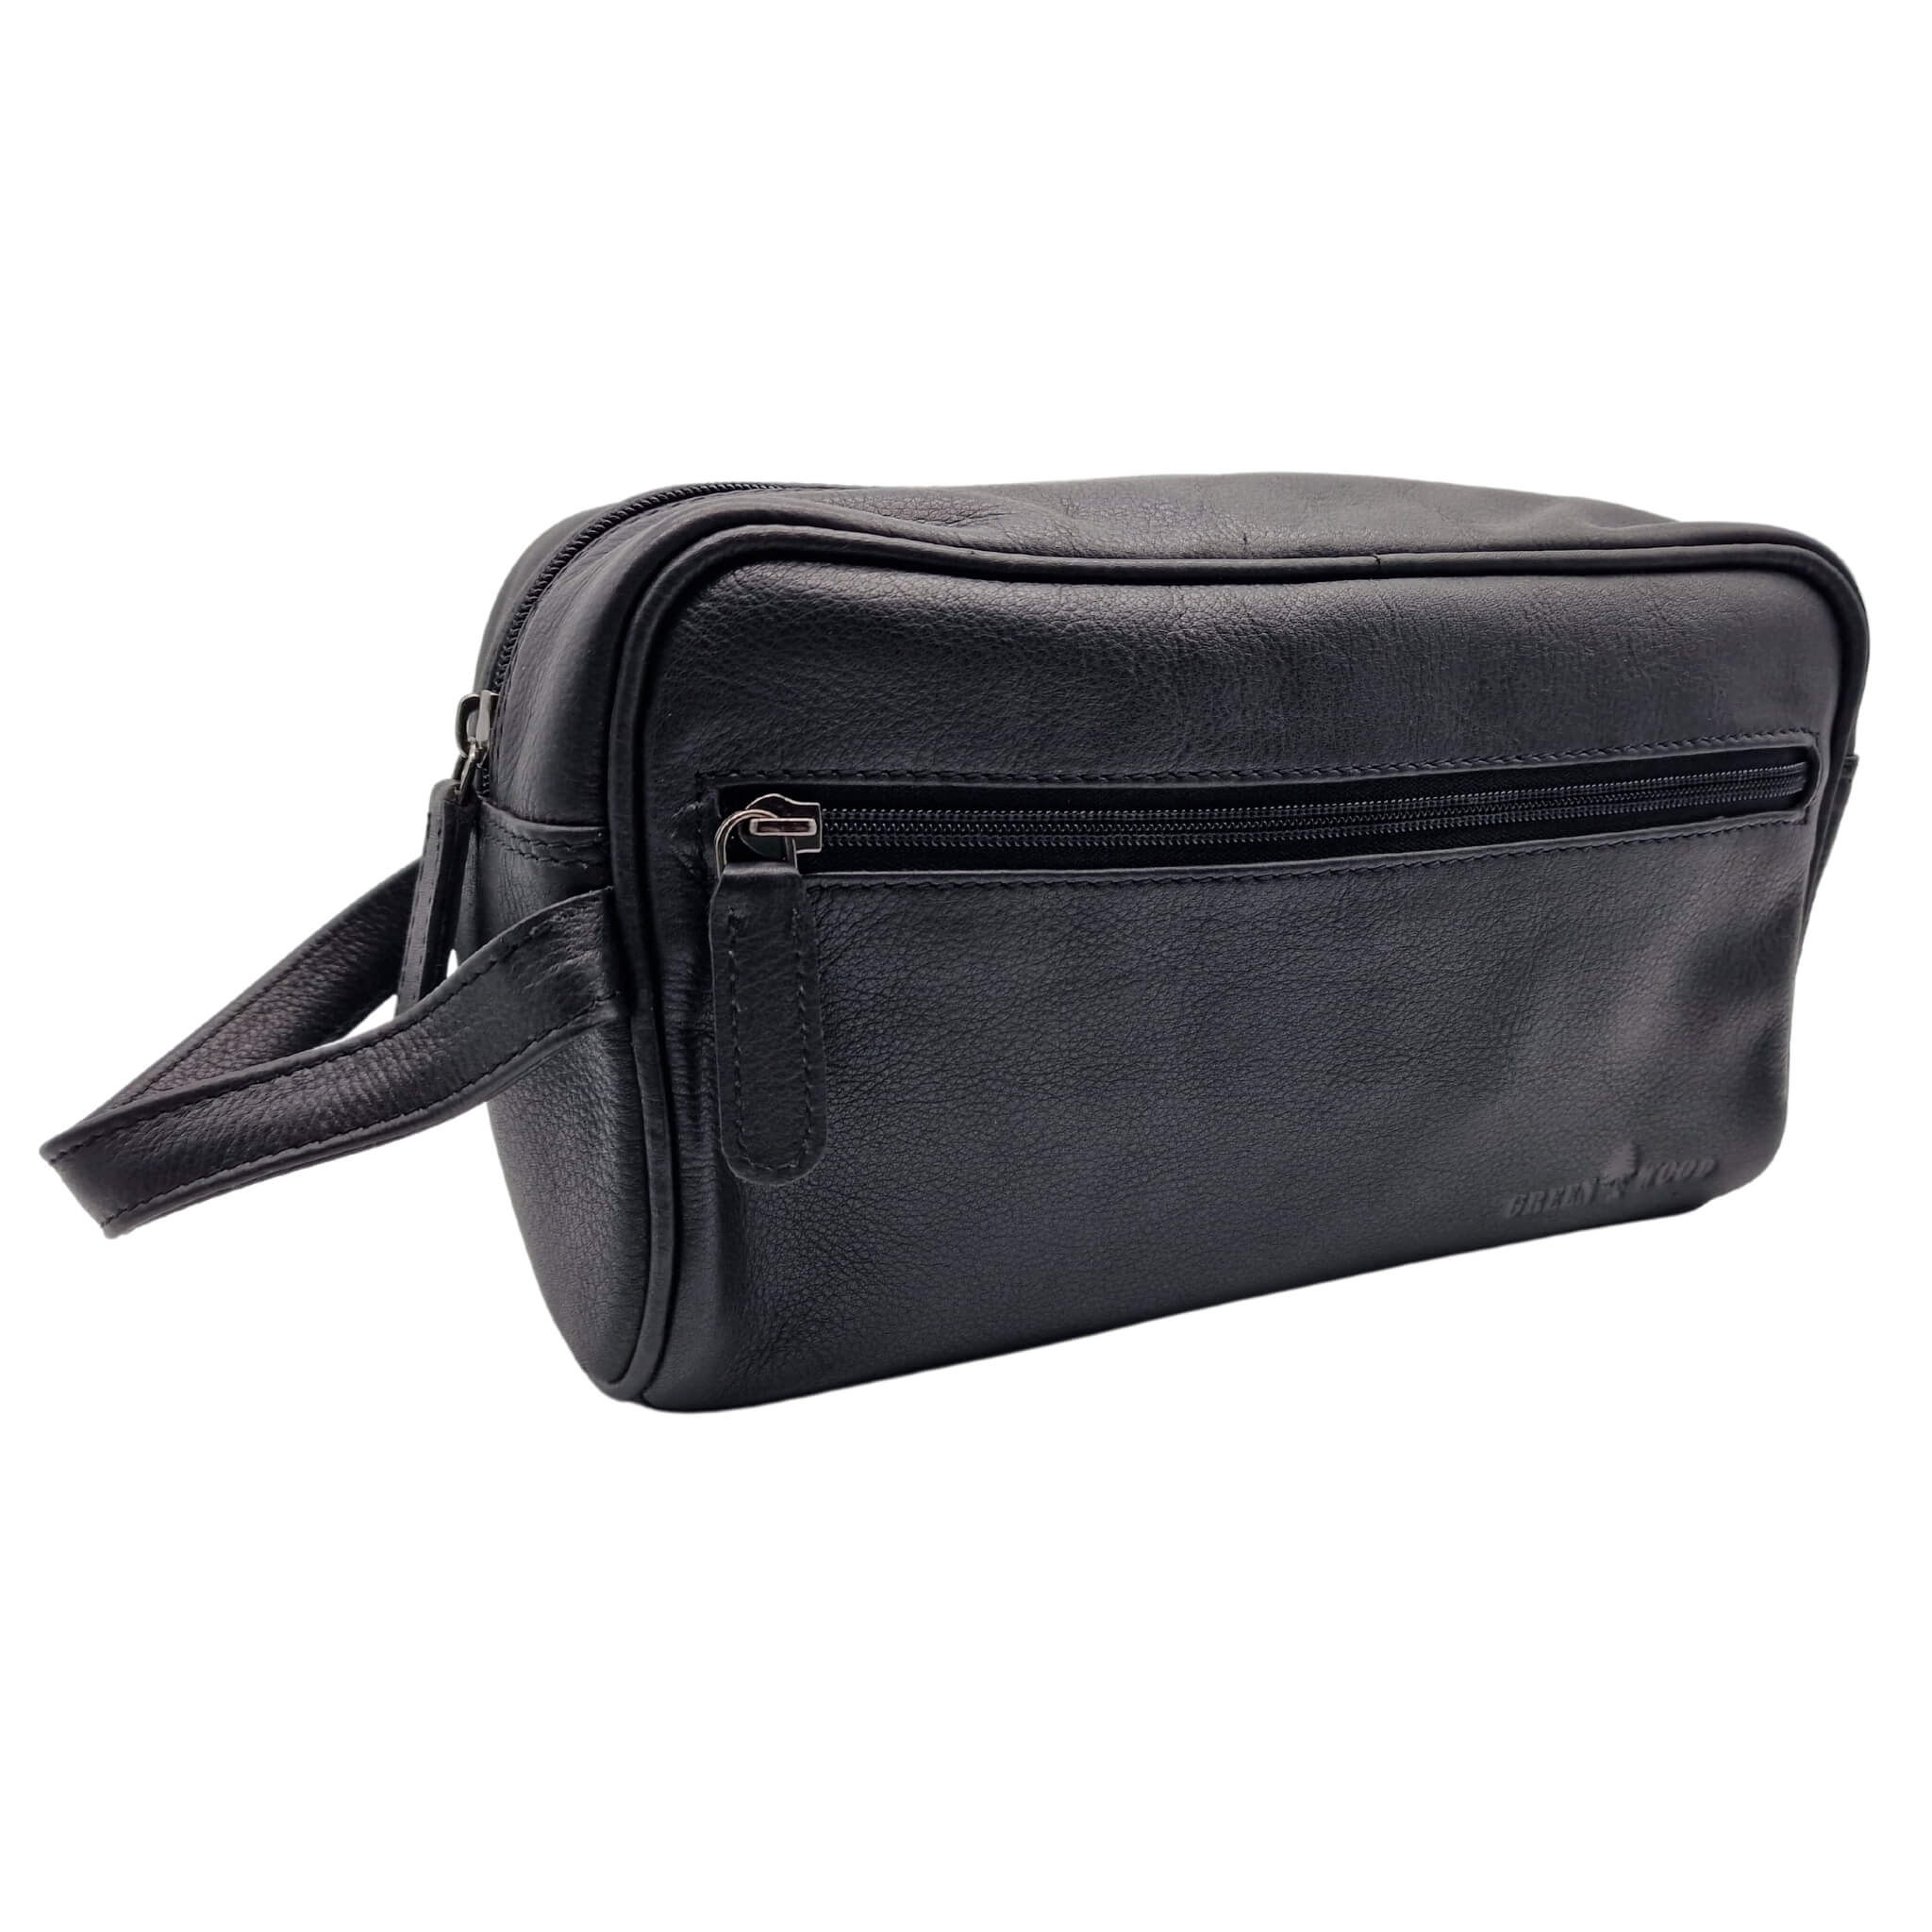 Amari Leather Toiletry Bag Men Wash Bag Women with Compartments